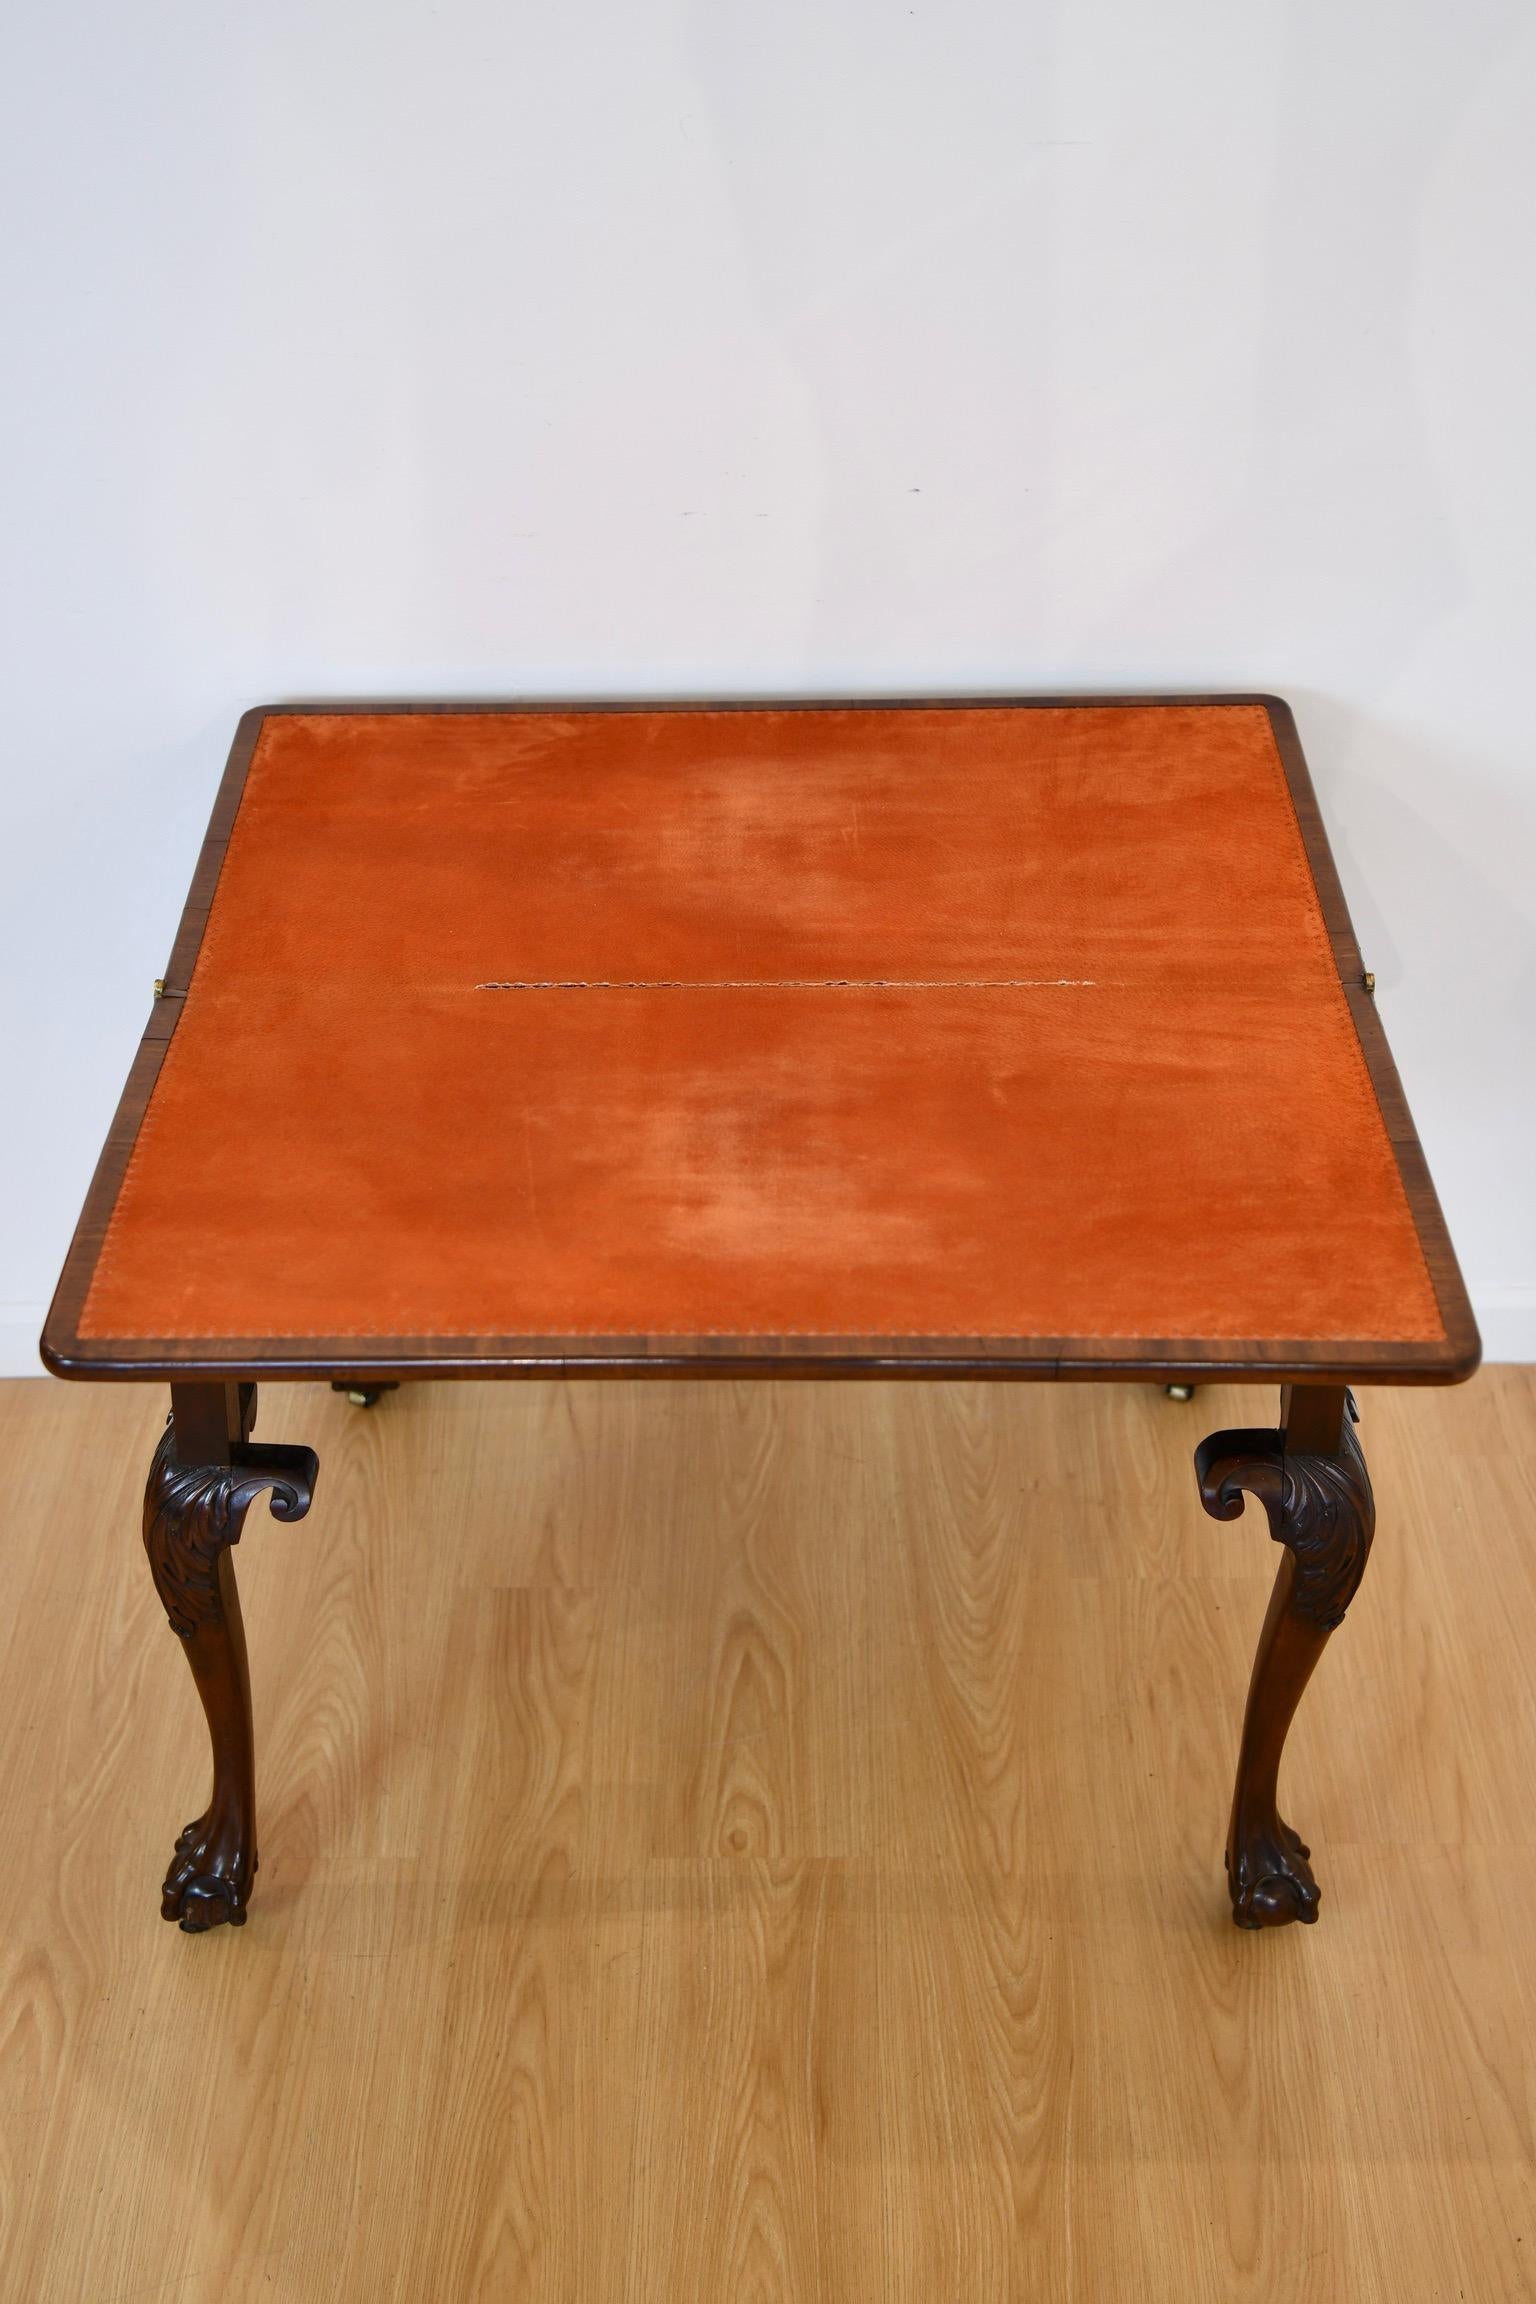 Georgian Revival Transforming Desk and Games Table For Sale 7